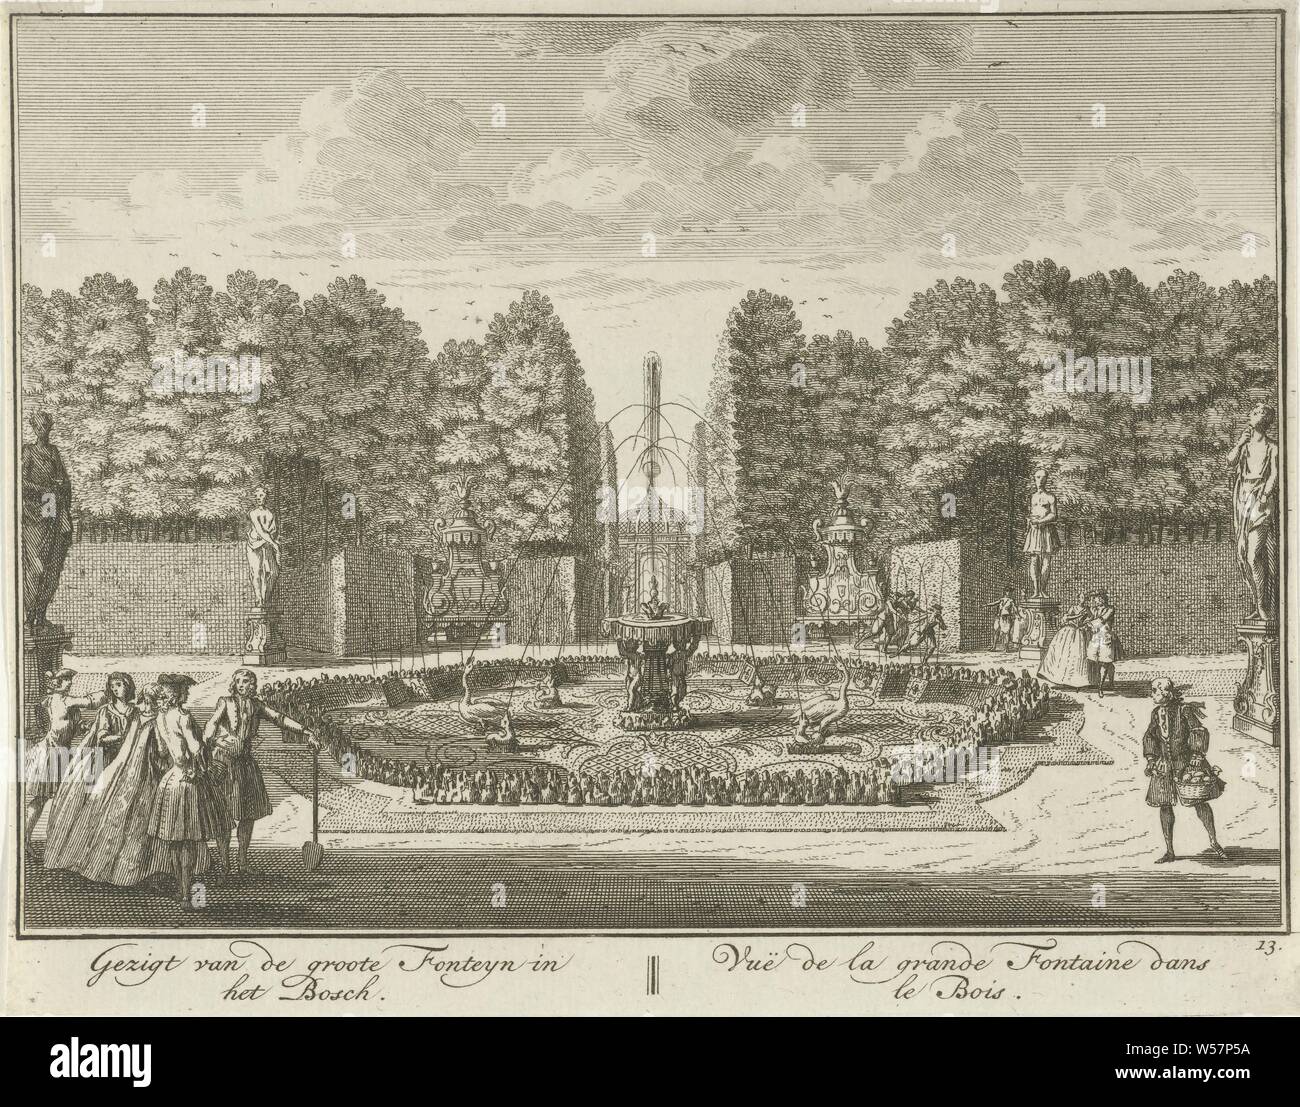 Large fountain in the garden of Huis ter Meer in Maarssen View of the great Fonteyn in the Bosch / Vue de la grande Fontaine dans le Bois (title on object) The Oud Adelyk huys and Ridderhofstad Ter Meer (series title), View of the large fountain in the French garden of Huis ter Meer, surrounded by figures. The print is part of a series with 26 faces on Huis ter Meer and the accompanying estate in Maarssen, country house, French or architectonic garden, formal garden, garden fountain, Huis Ter Meer, Hendrik de Leth, c. 1740, paper, etching, h 156 mm × w 199 mm Stock Photo